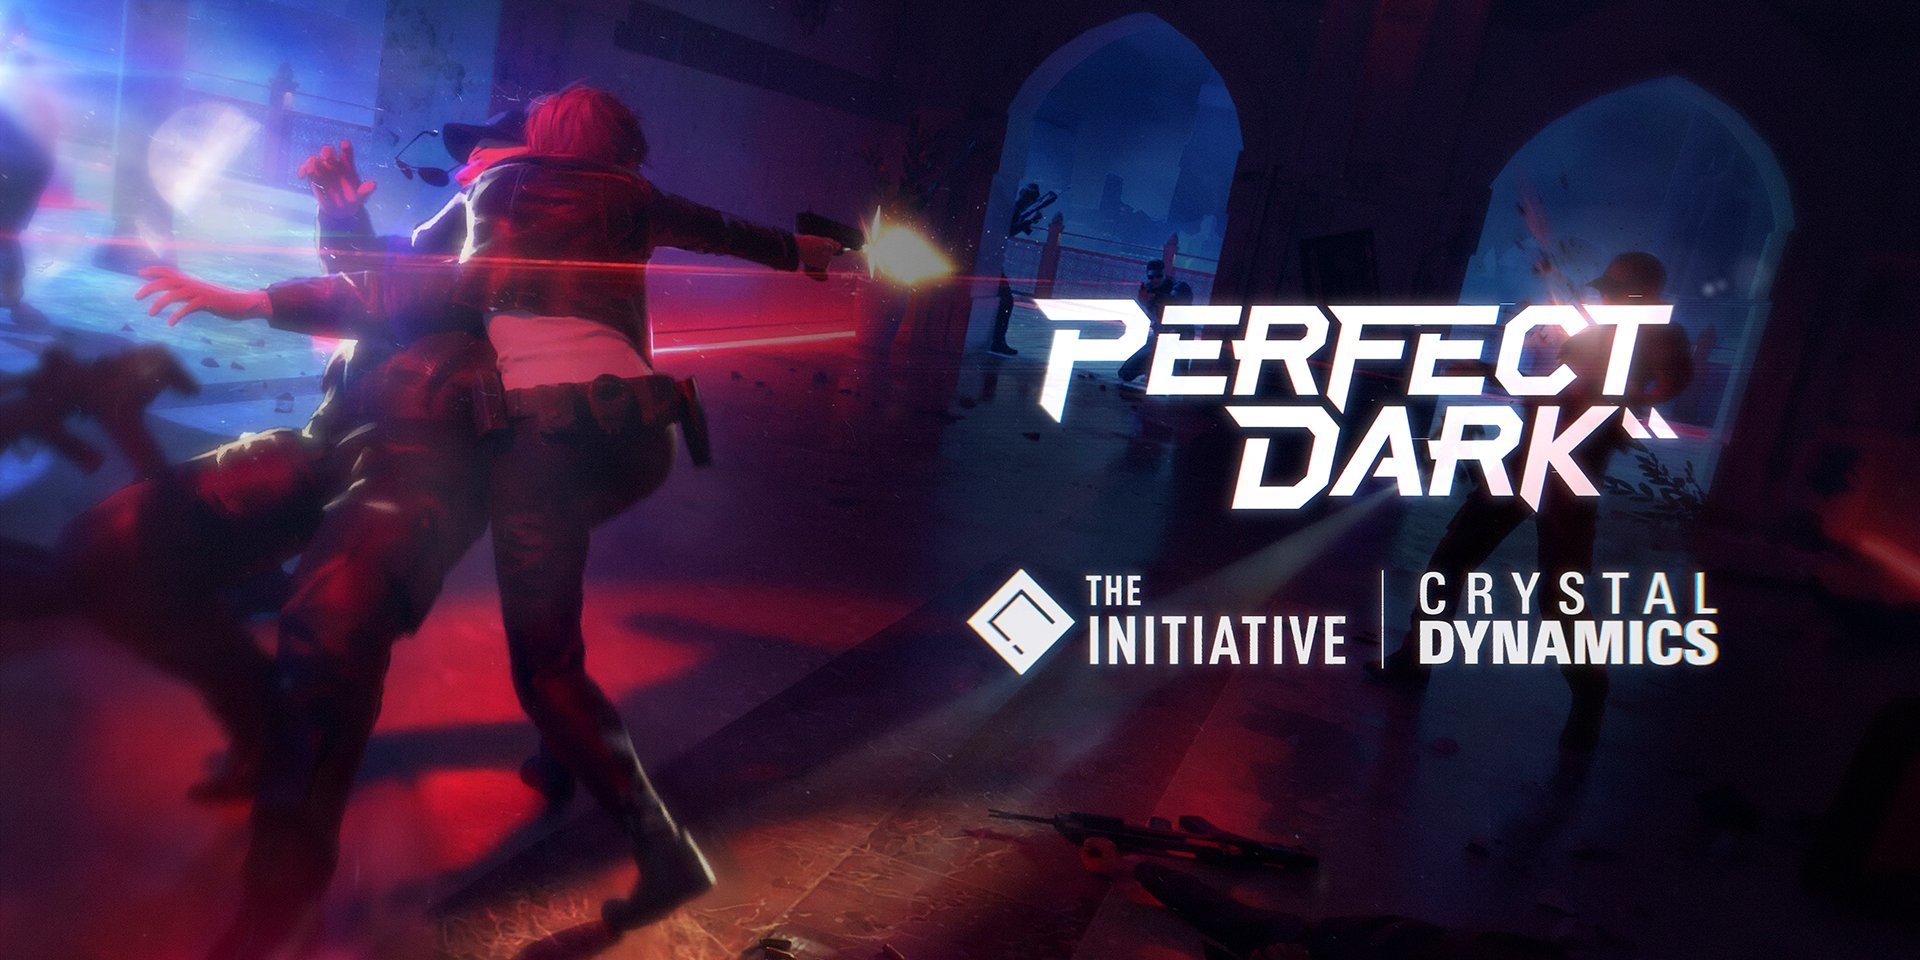 Jeff Grupp: “Perfect Dark is in a really tough spot”